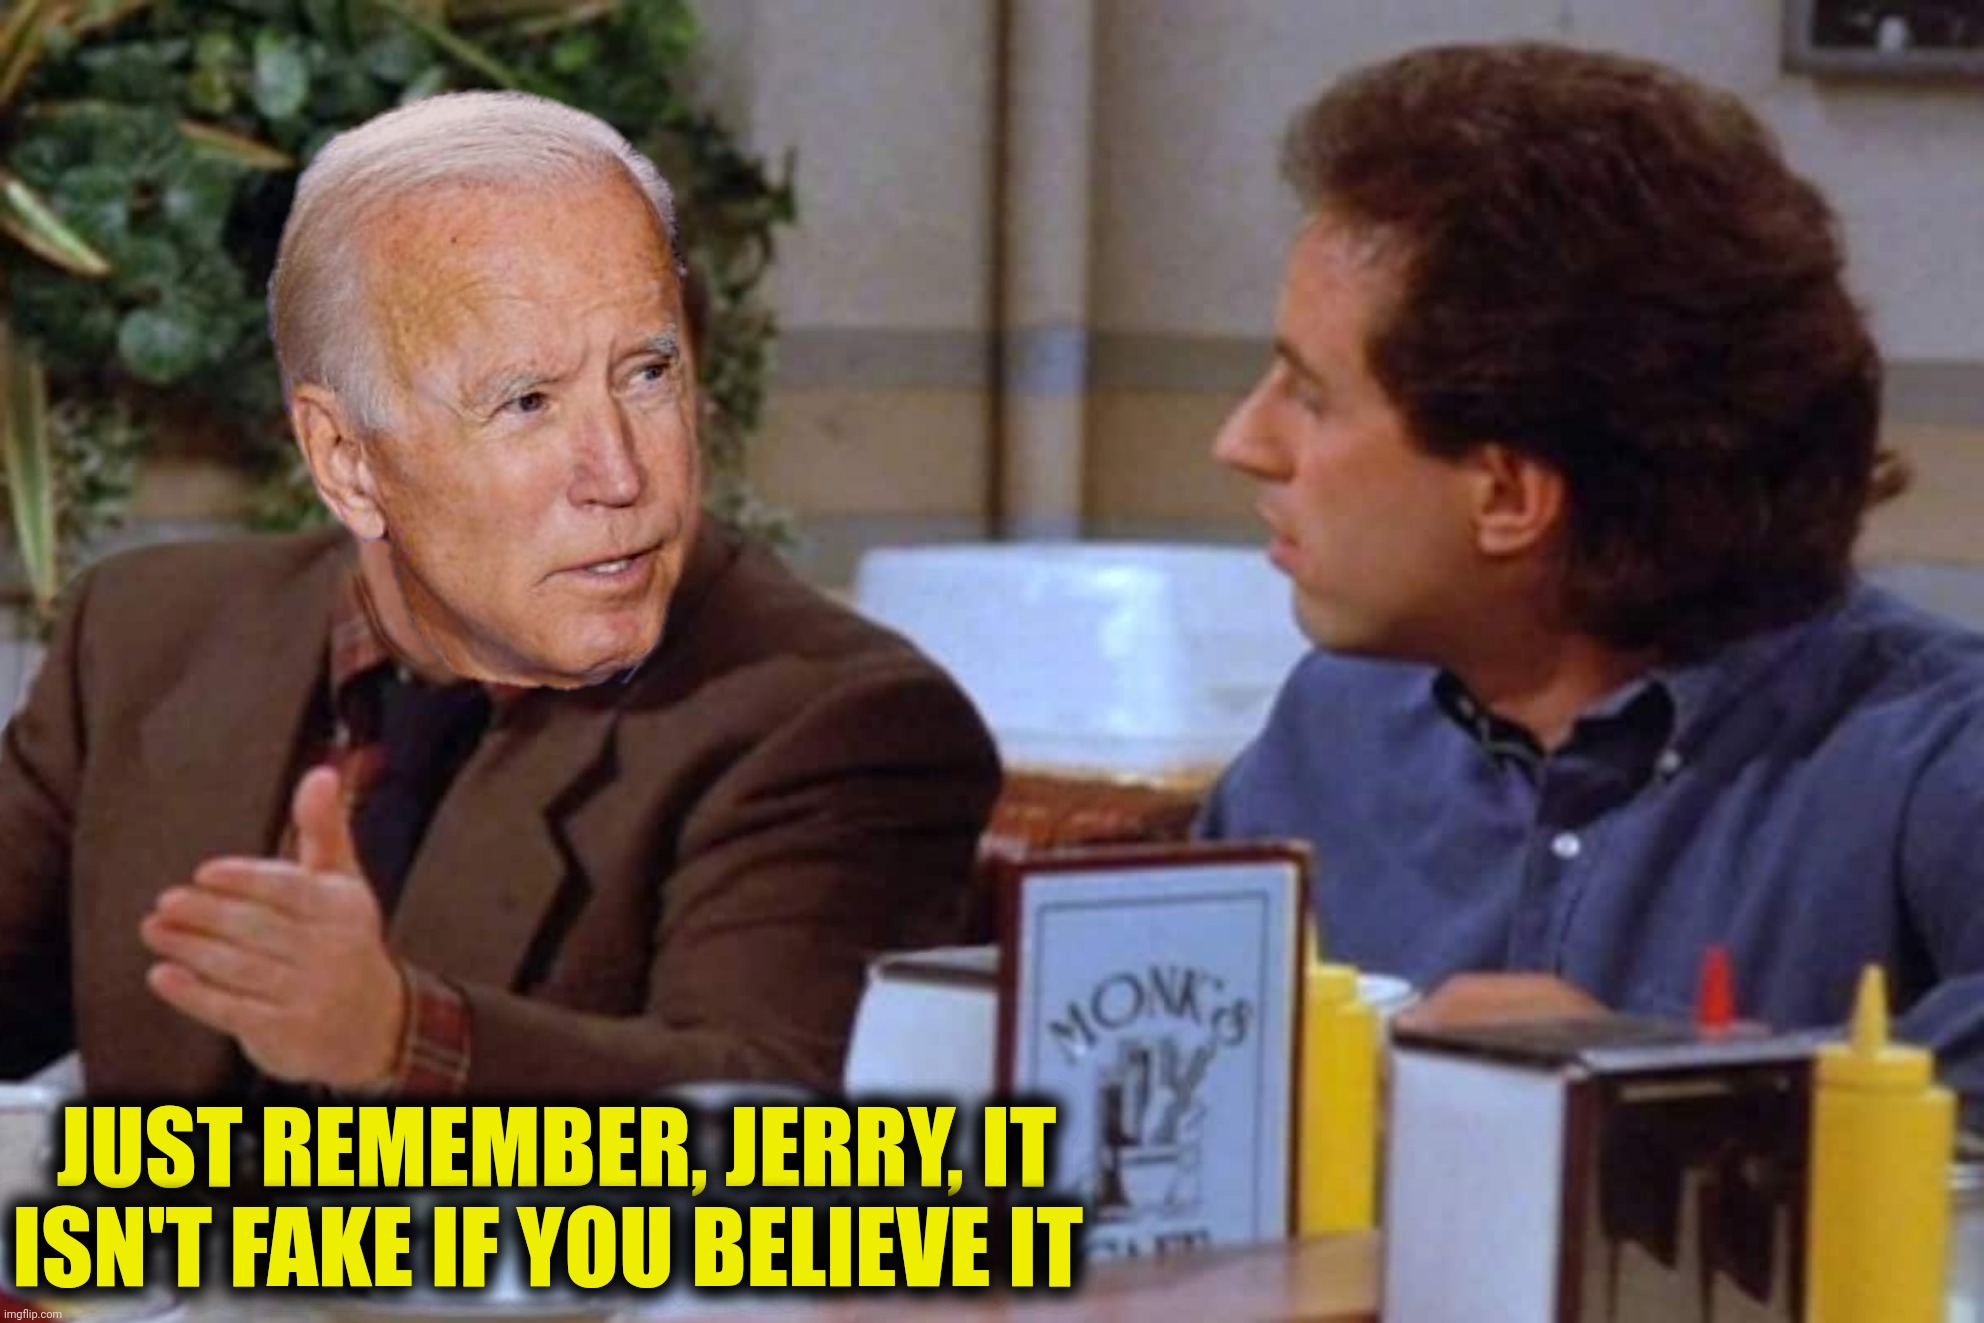 JUST REMEMBER, JERRY, IT ISN'T FAKE IF YOU BELIEVE IT | made w/ Imgflip meme maker